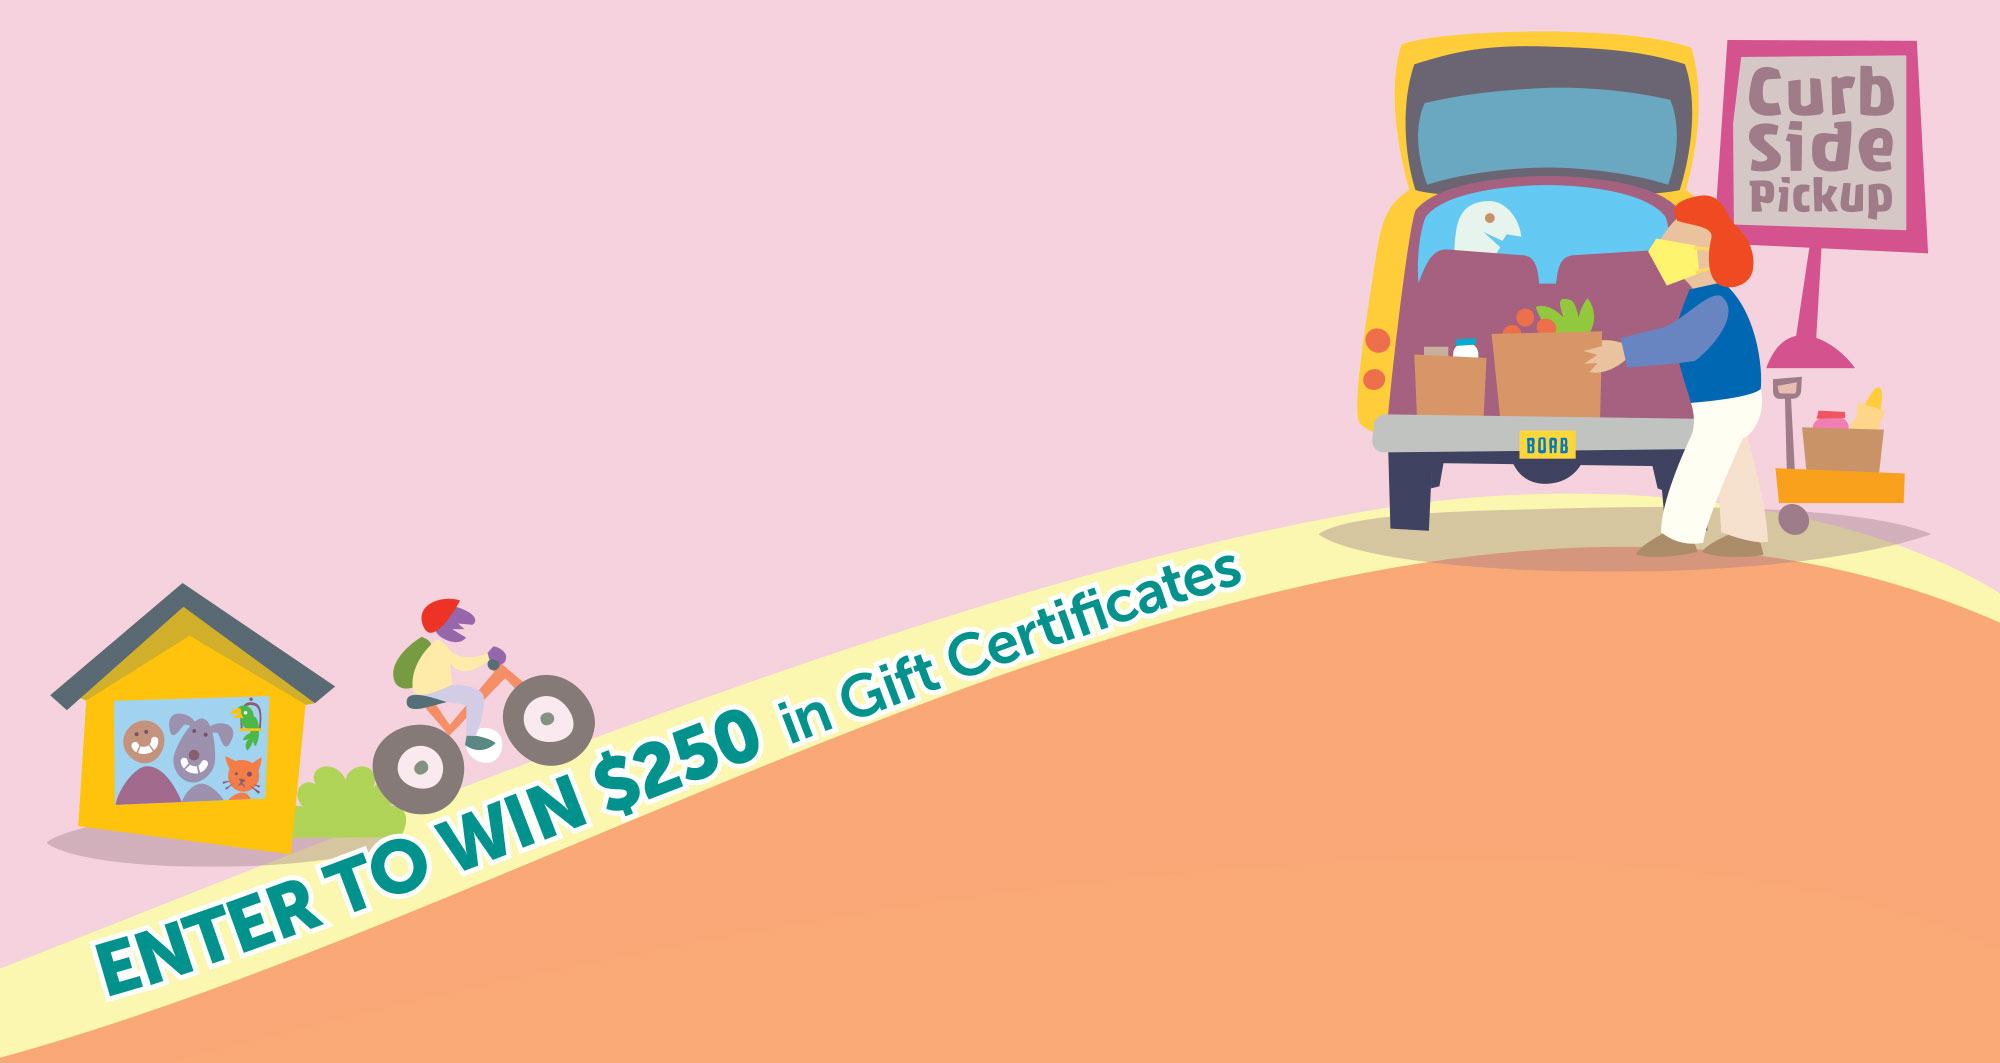 ENTER TO WIN $250 in Gift Certificates